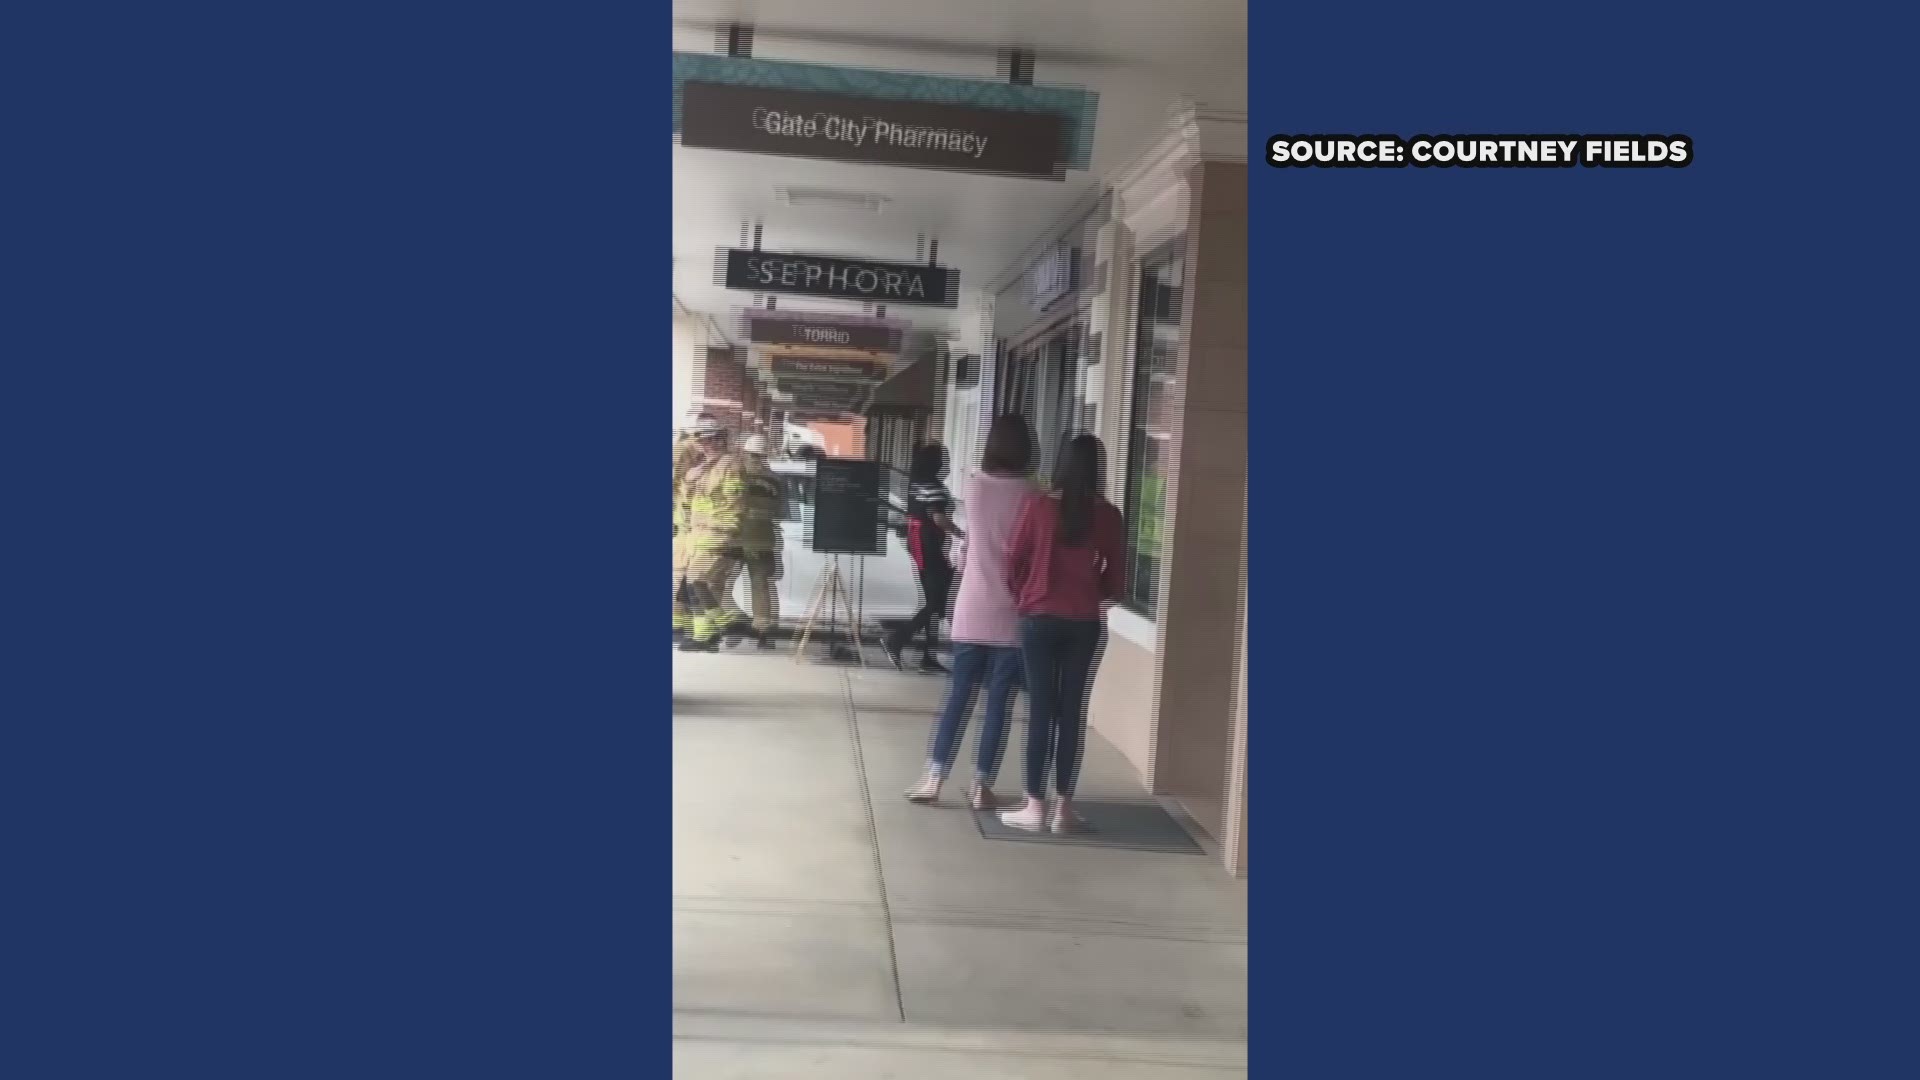 A WFMY News 2 viewer captured video after a car crashed into the Sephora store in Greensboro.